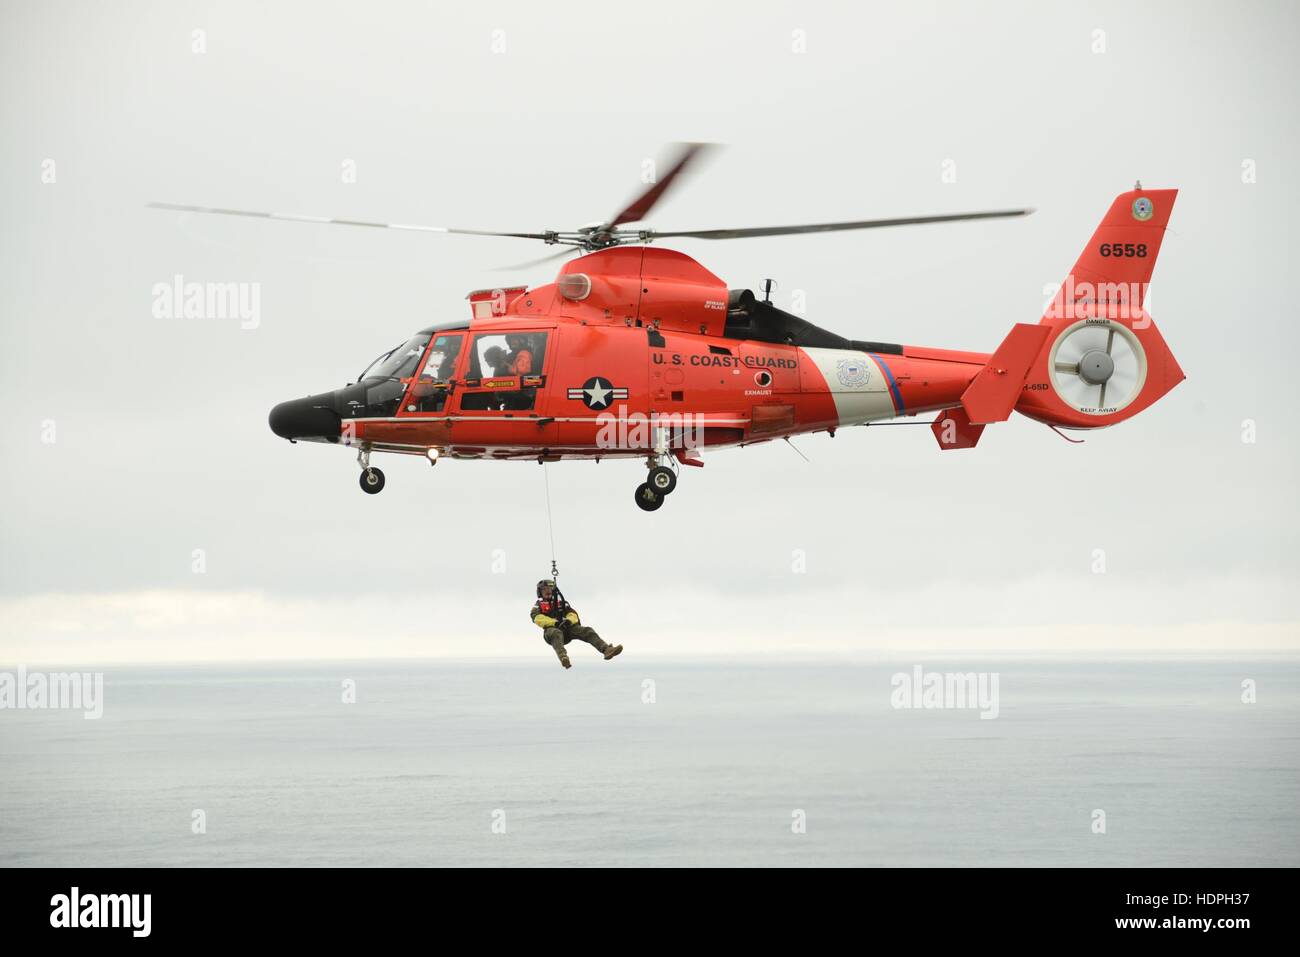 A U.S. Coast Guard pararescue officer dangles from a Eurocopter MH-65 Dolphin search and rescue helicopter during an Advanced Helicopter Rescue School training exercise near the North Head Lighthouse November 10, 2016 in Ilwaco, Washington. Stock Photo